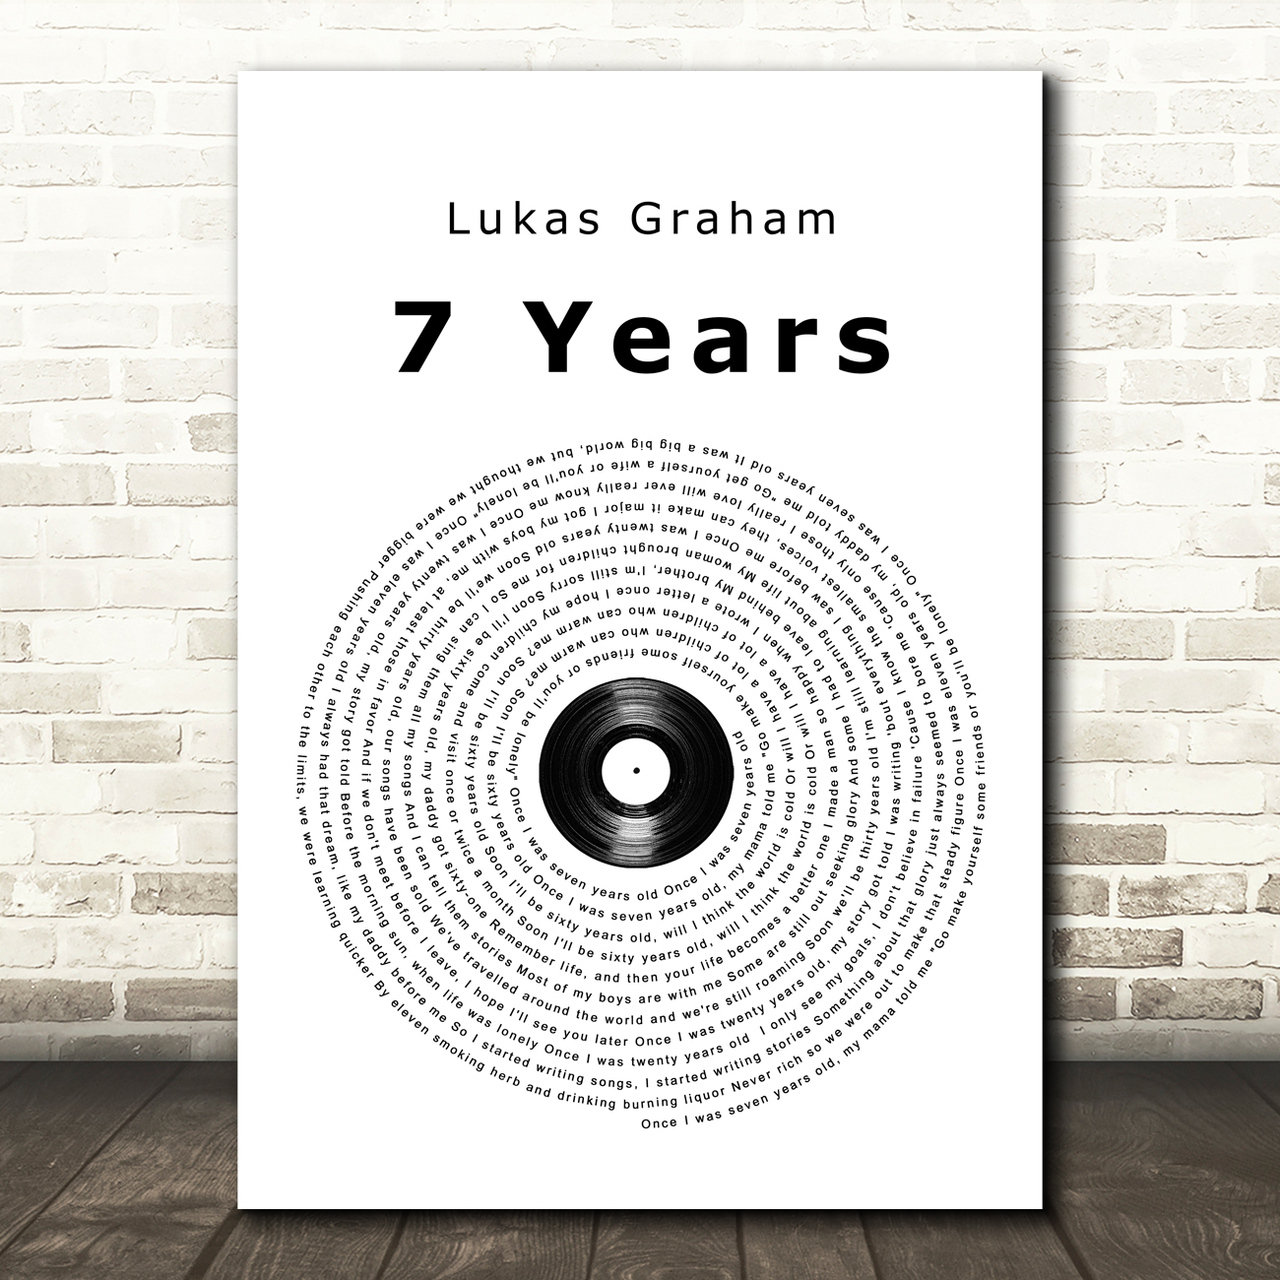 Lukas Graham 7 Years Vinyl Record Song Lyric Quote Music Poster Print